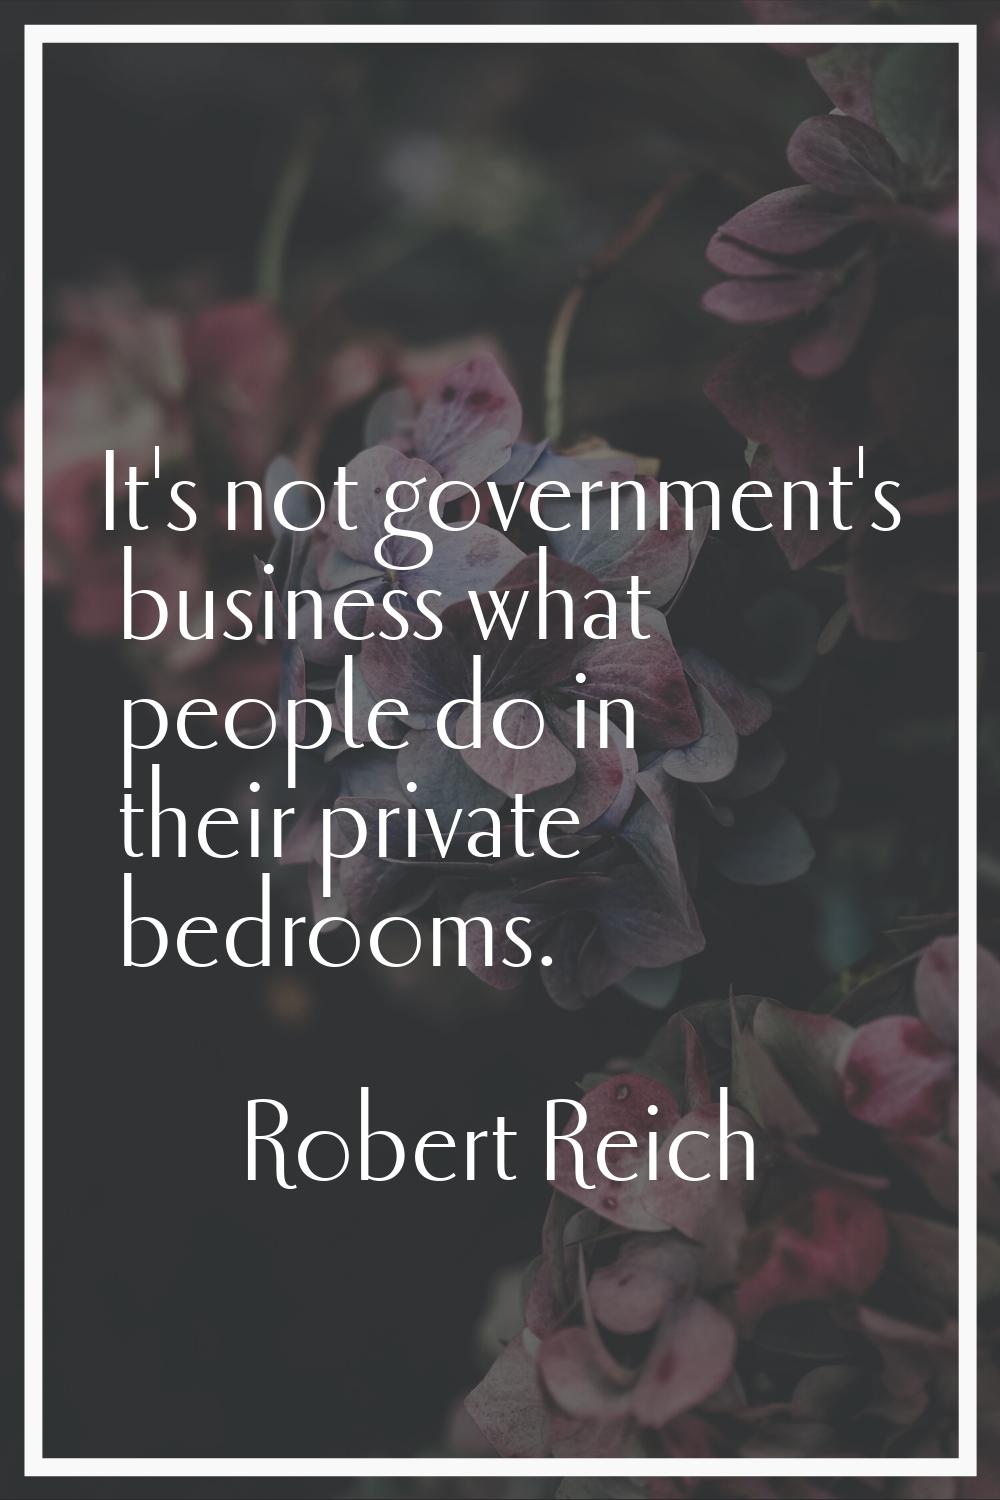 It's not government's business what people do in their private bedrooms.